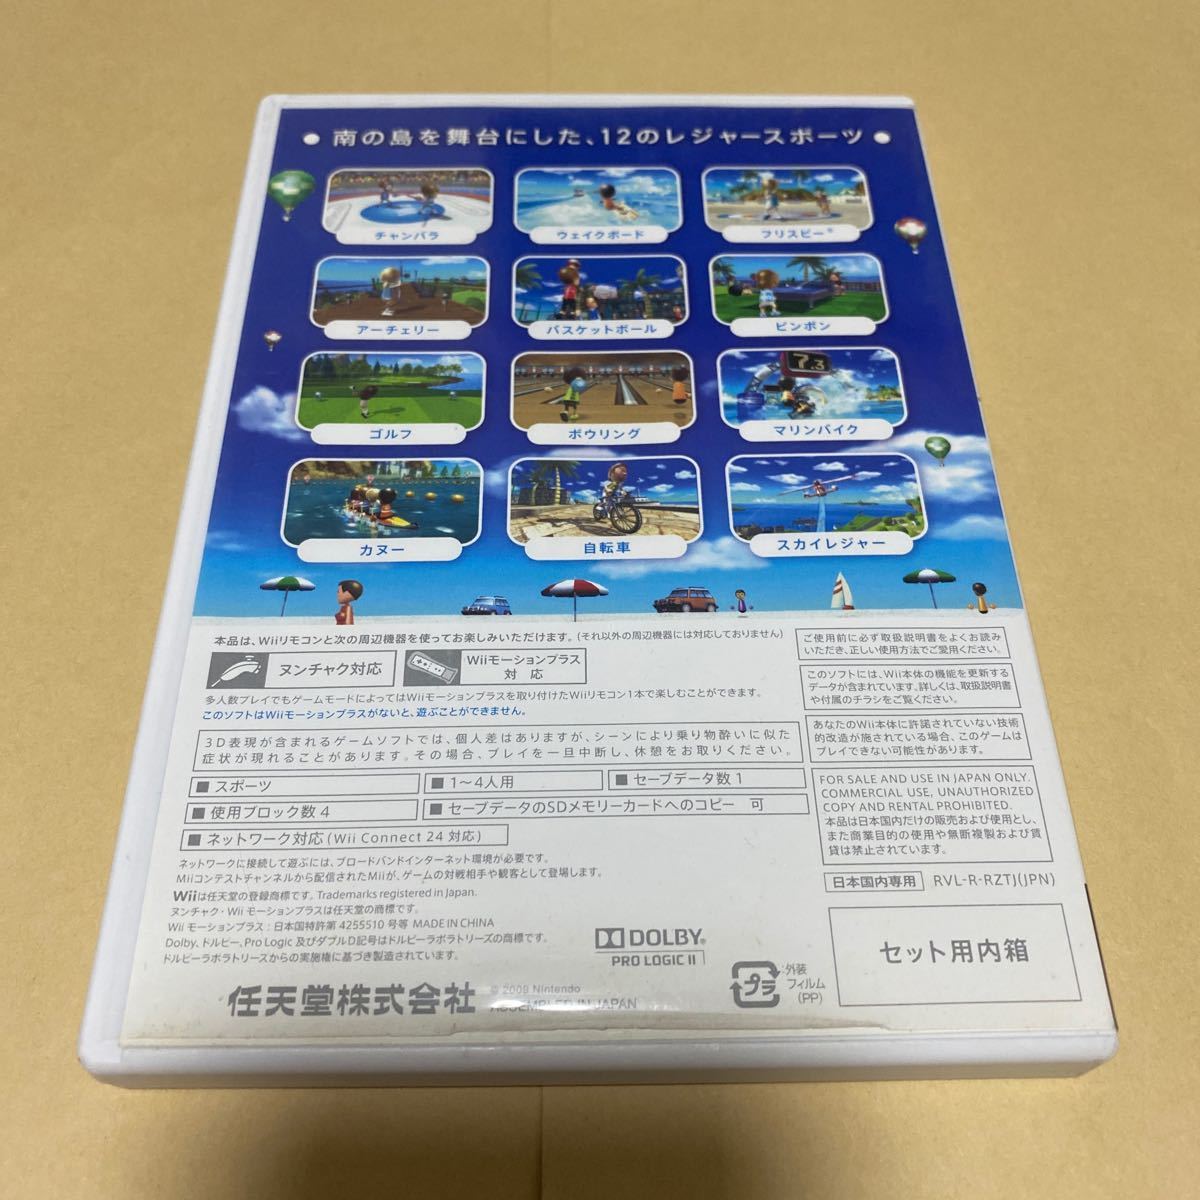 WiiスポーツリゾートとはじめてのWii  Wii